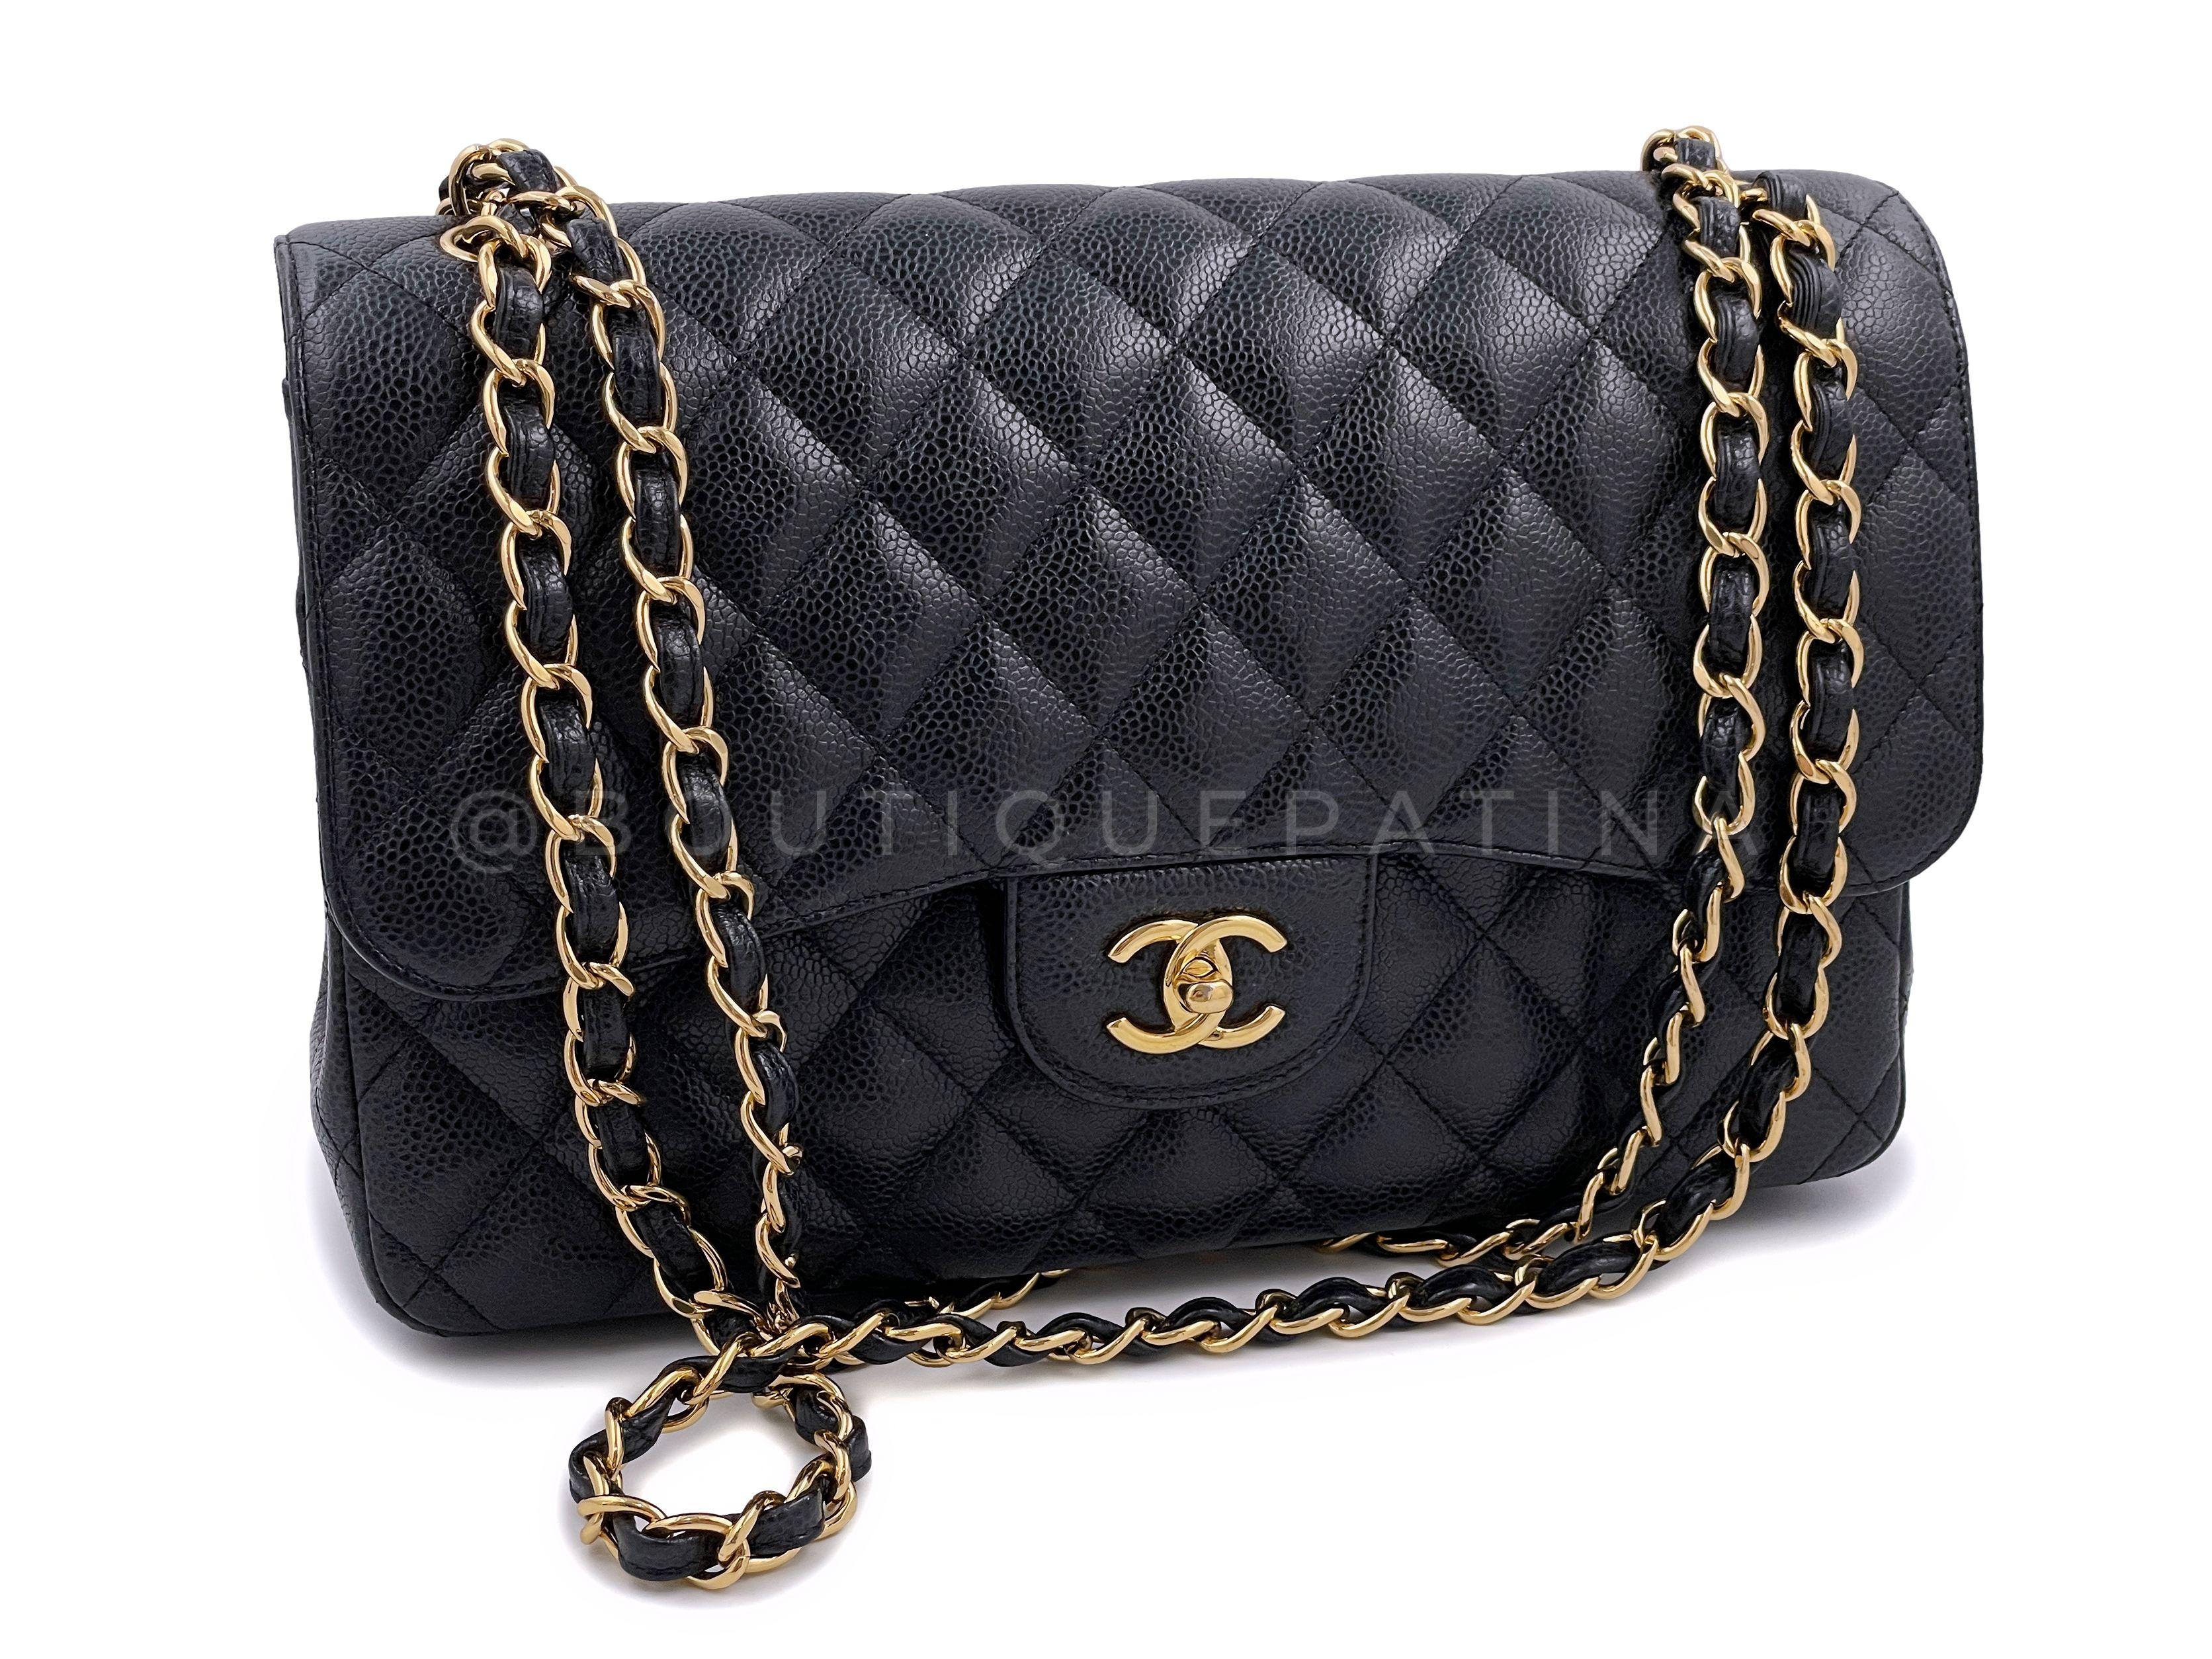 Store item: 65399
Now considered the ultimate investment handbag, Chanel's classic flaps are both treasure and commodity, and on every woman's wish list. 

With a double flap, or another flap on the interior, this bag has an extra flat pocket